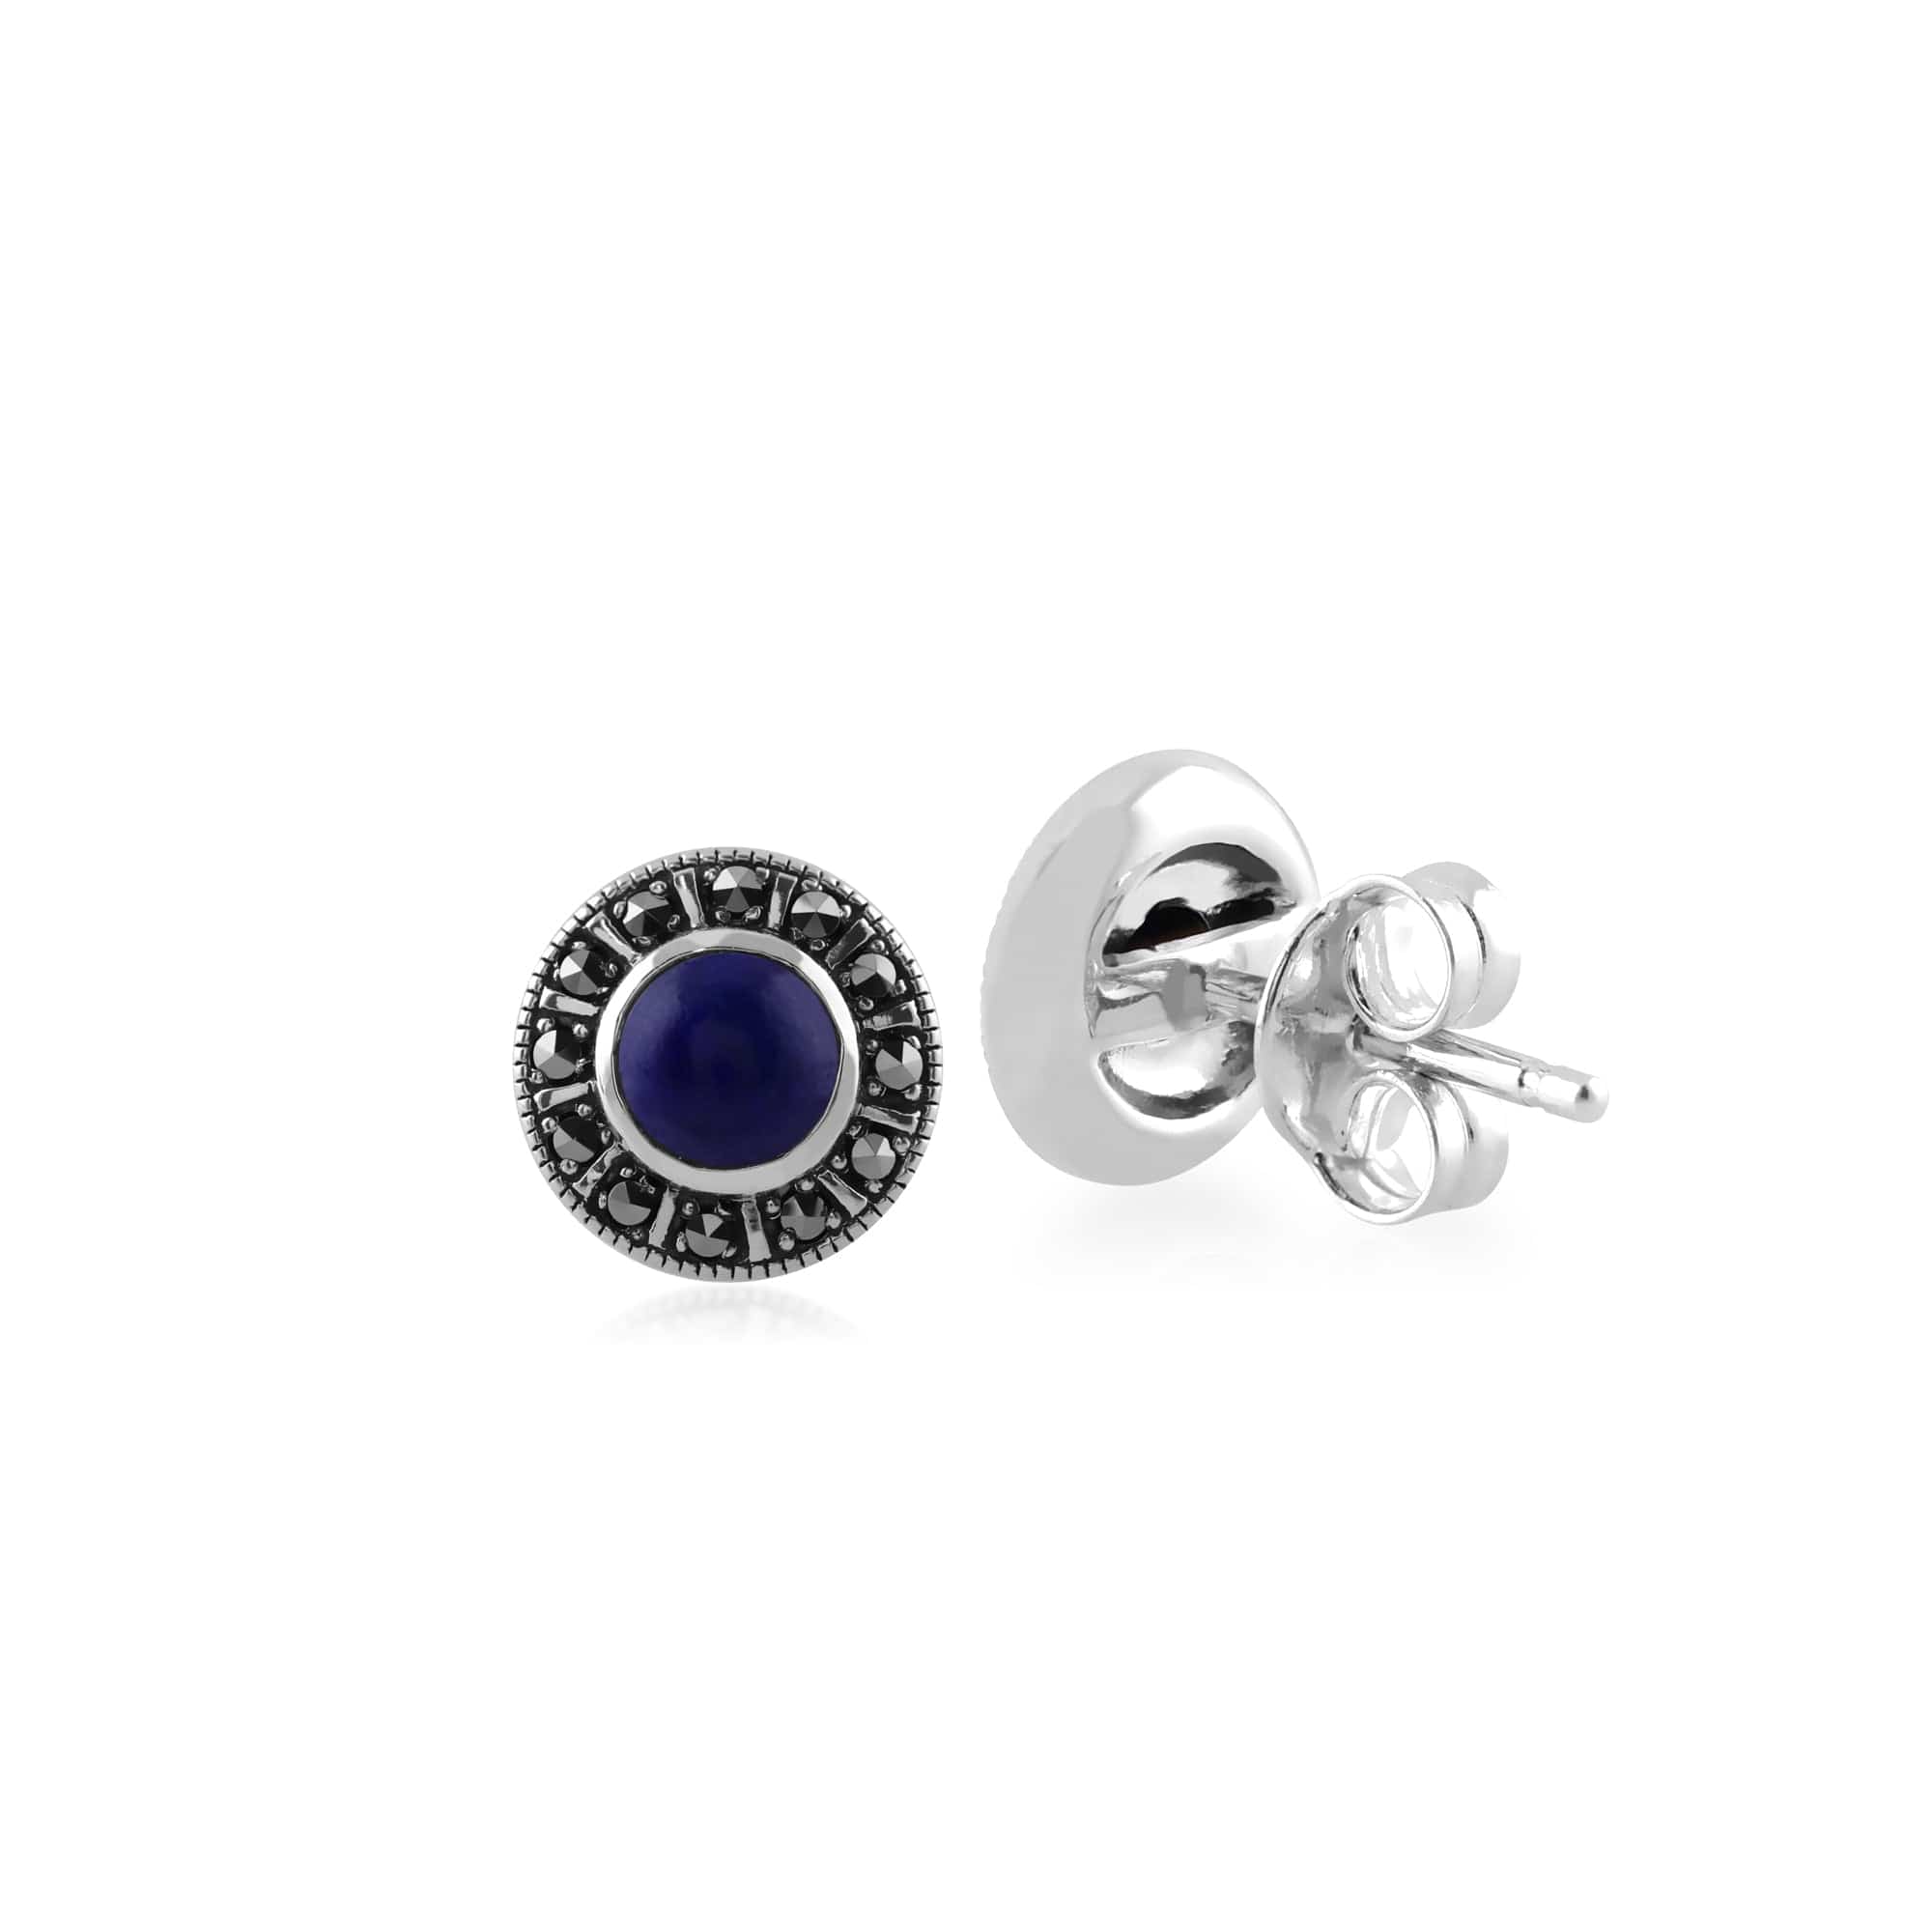 214E850402925 Art Deco Style Round Lapis Lazuli & Marcasite Halo Stud Earrings in 925 Sterling Silver 2